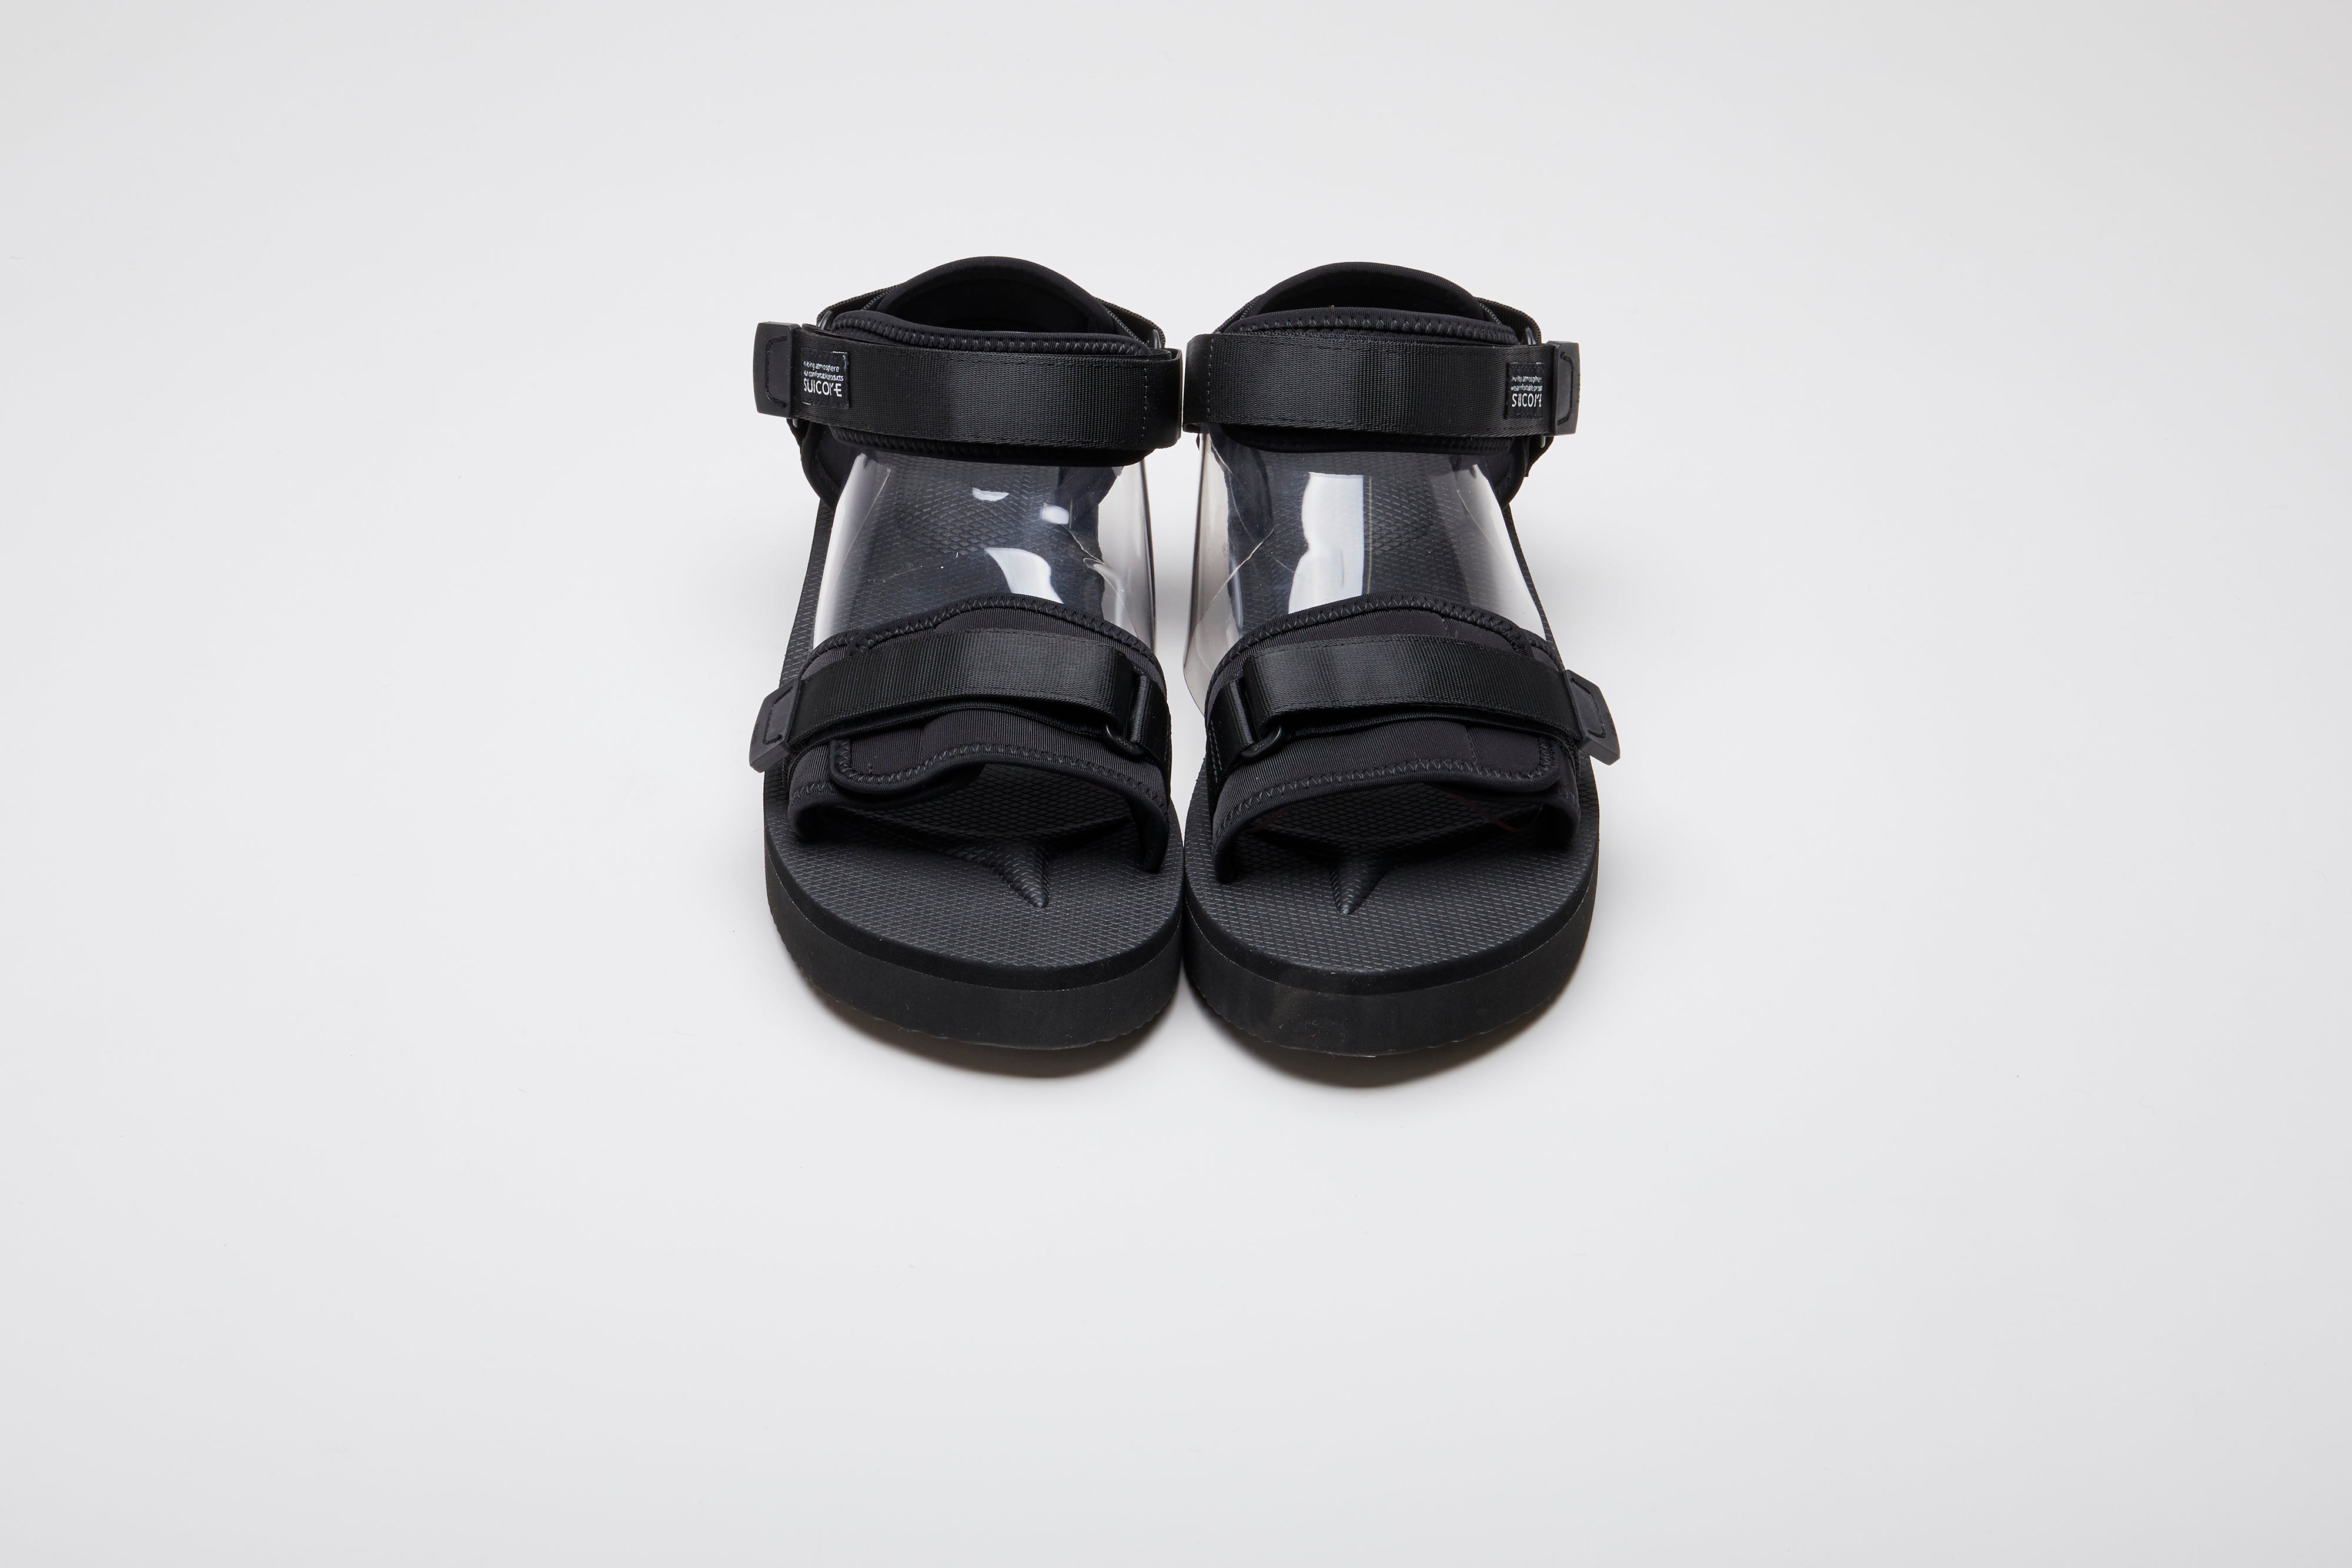 SUICOKE CEL-PO sandals with black nylon upper, black midsole and sole, strap and logo patch. From Spring/Summer 2023 collection on eightywingold Web Store, an official partner of SUICOKE. OG-64PO BLACK